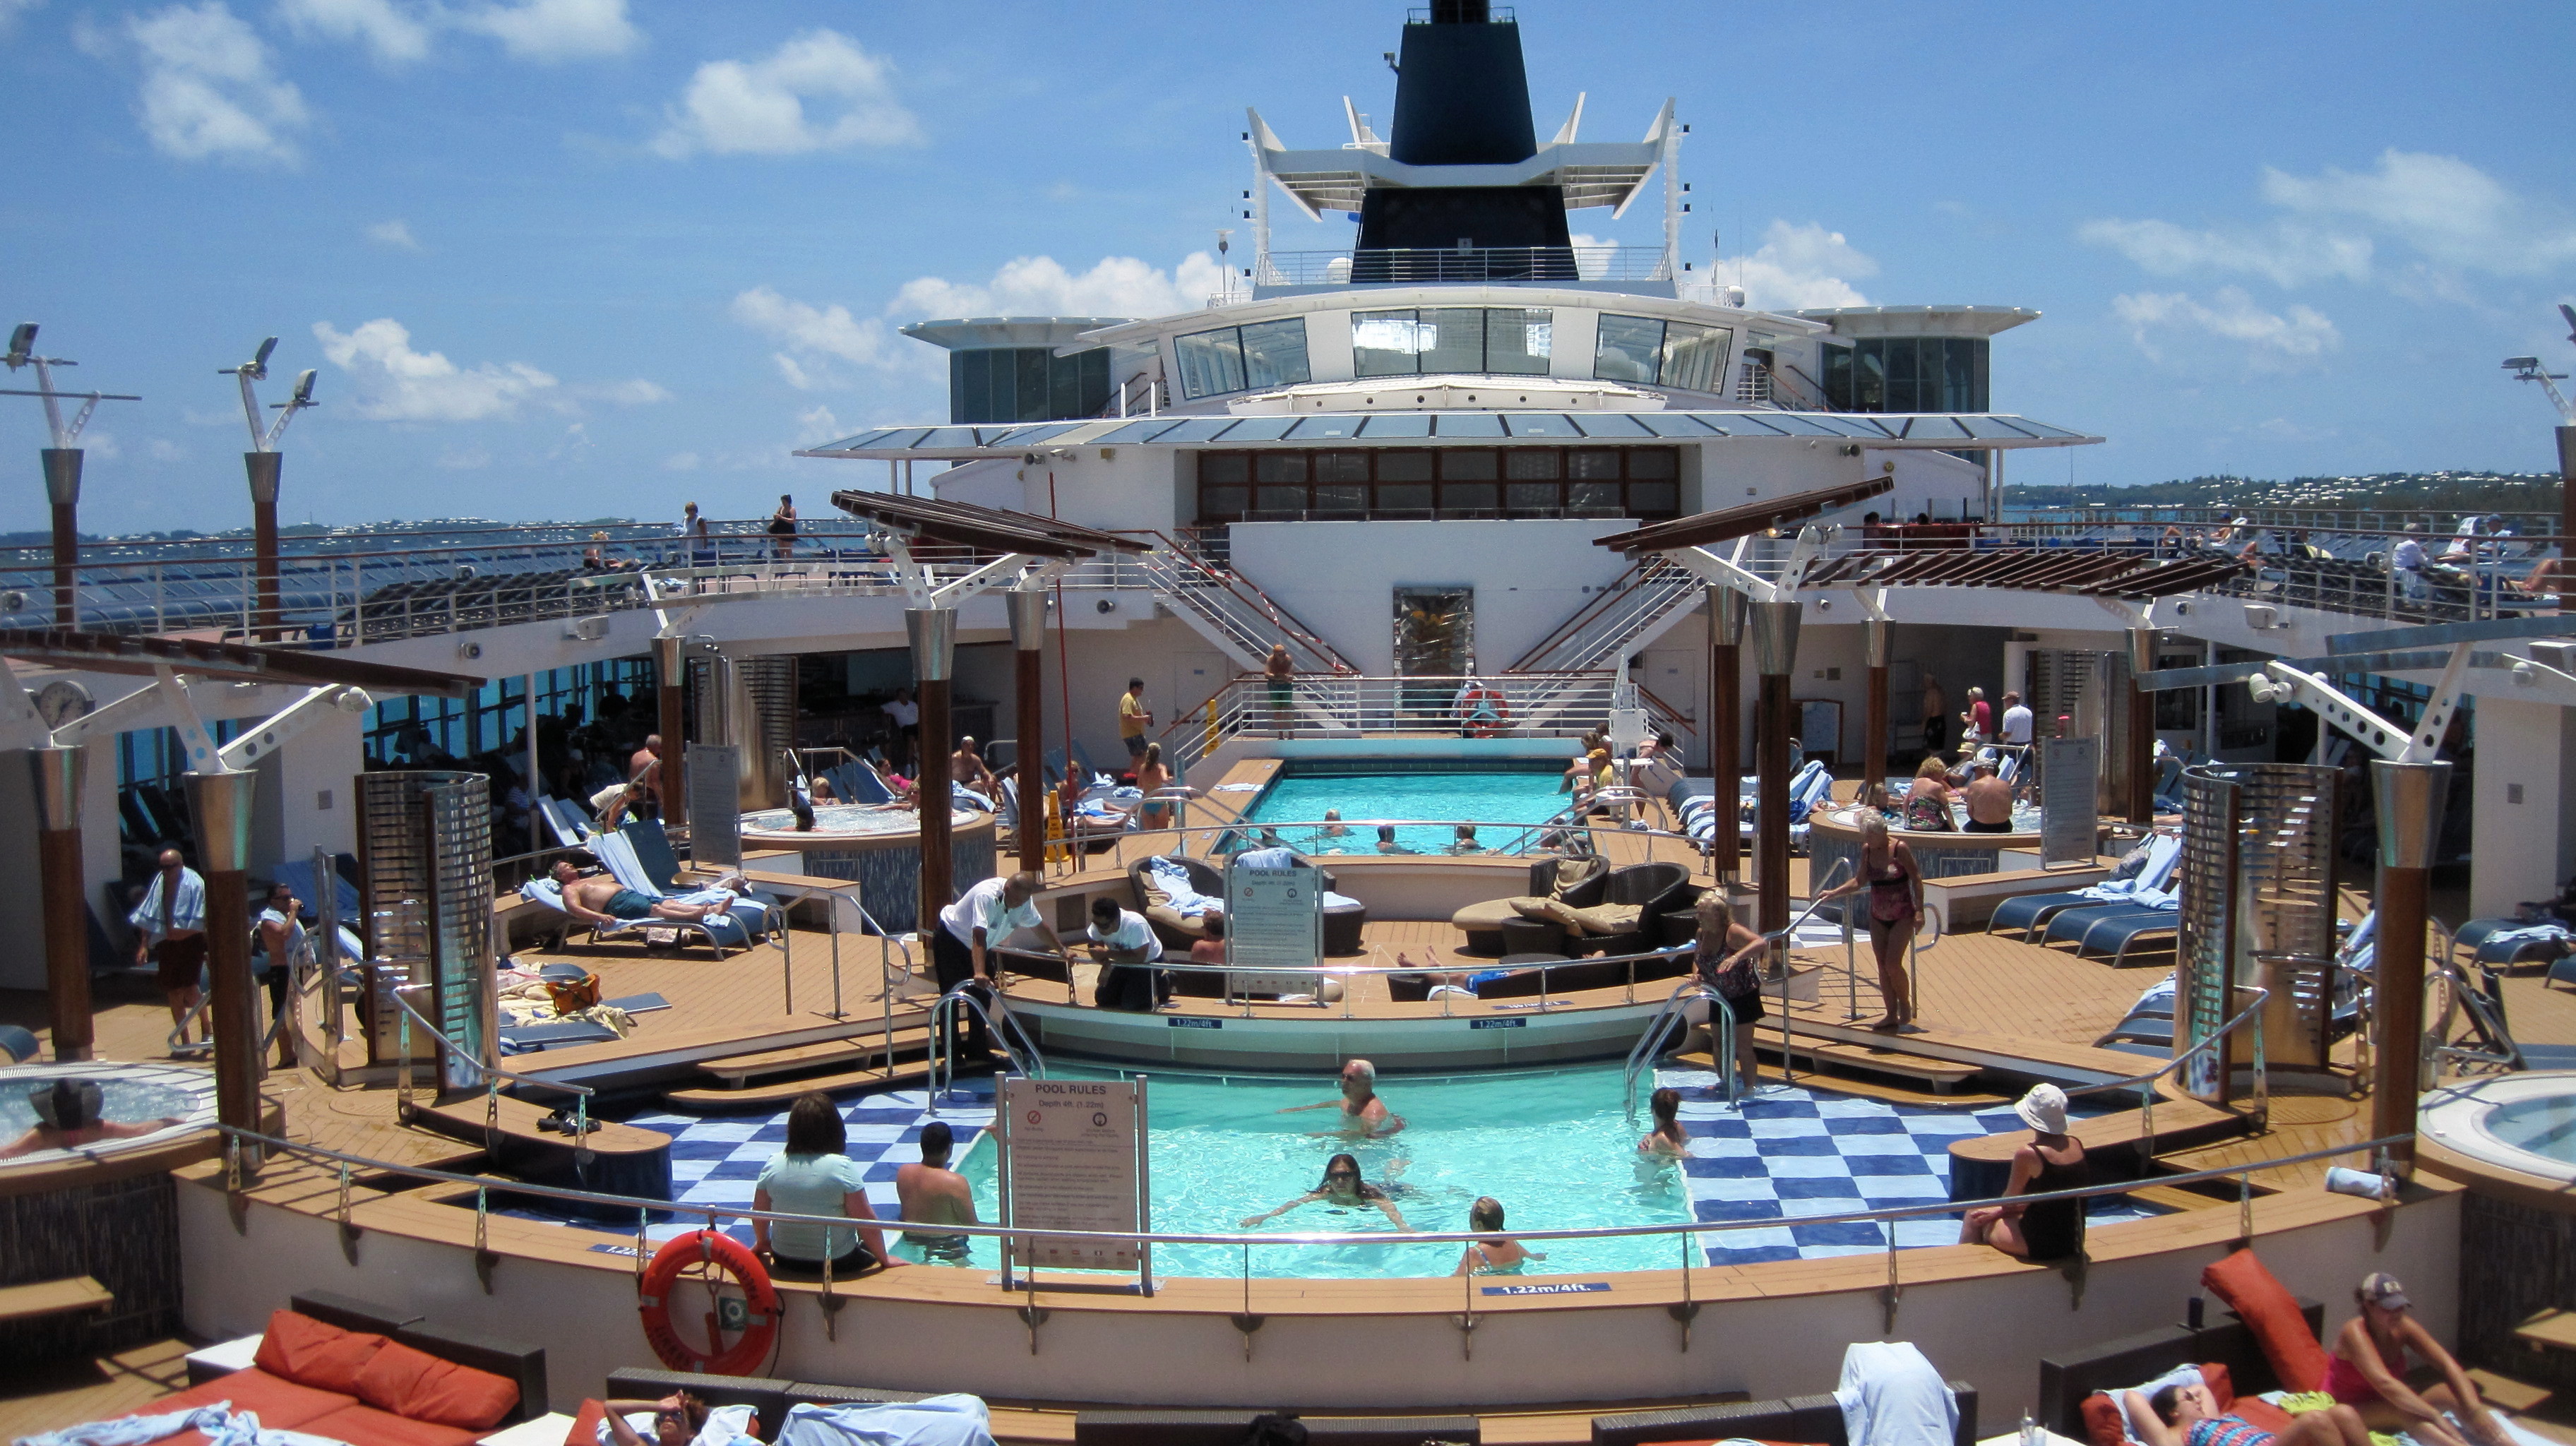 Celebrity Summit Cruise Review by Brettf June 15, 2014